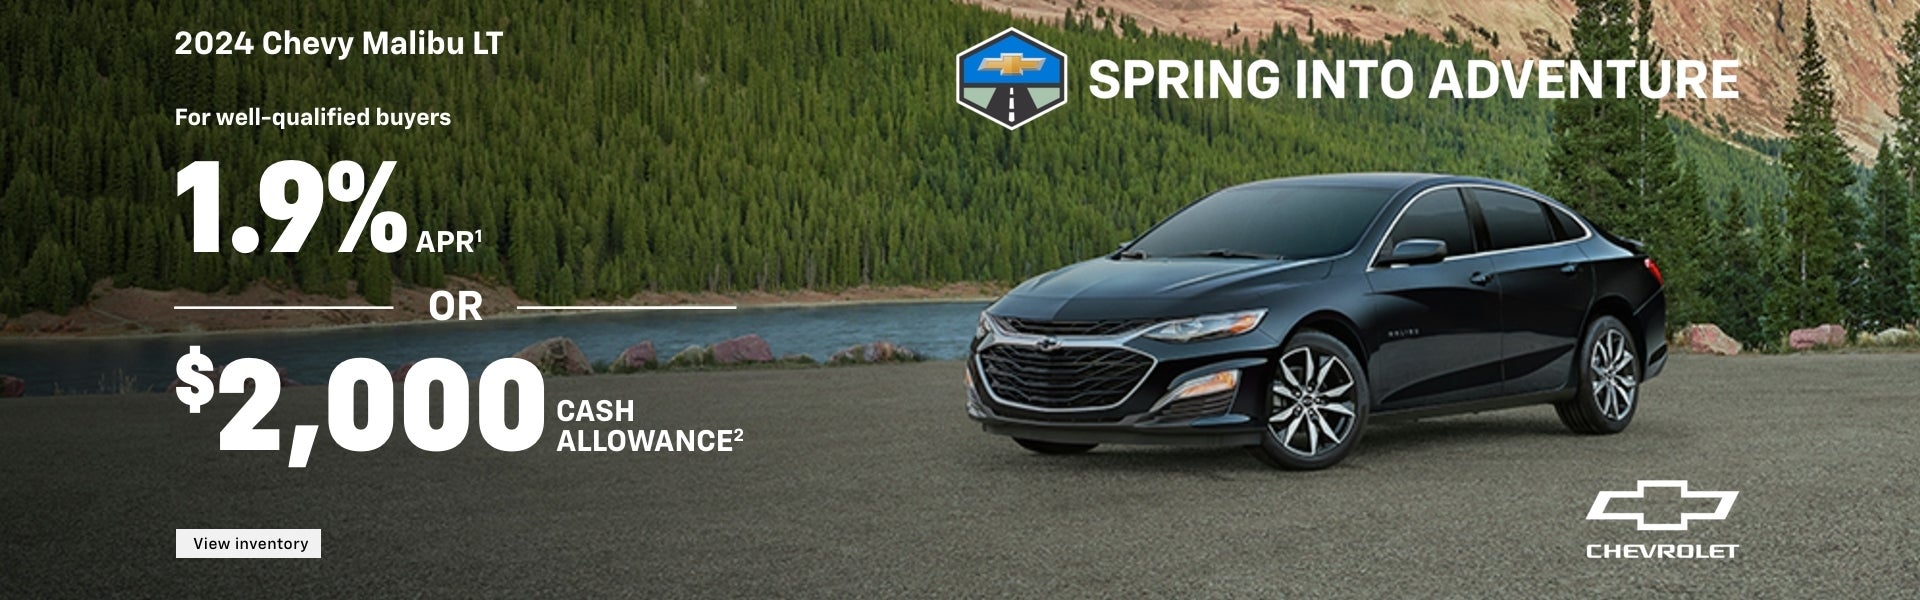 2024 Chevy Malibu LT. Spring into Adventure. For well-qualified buyers 1.9% APR when you finance ...